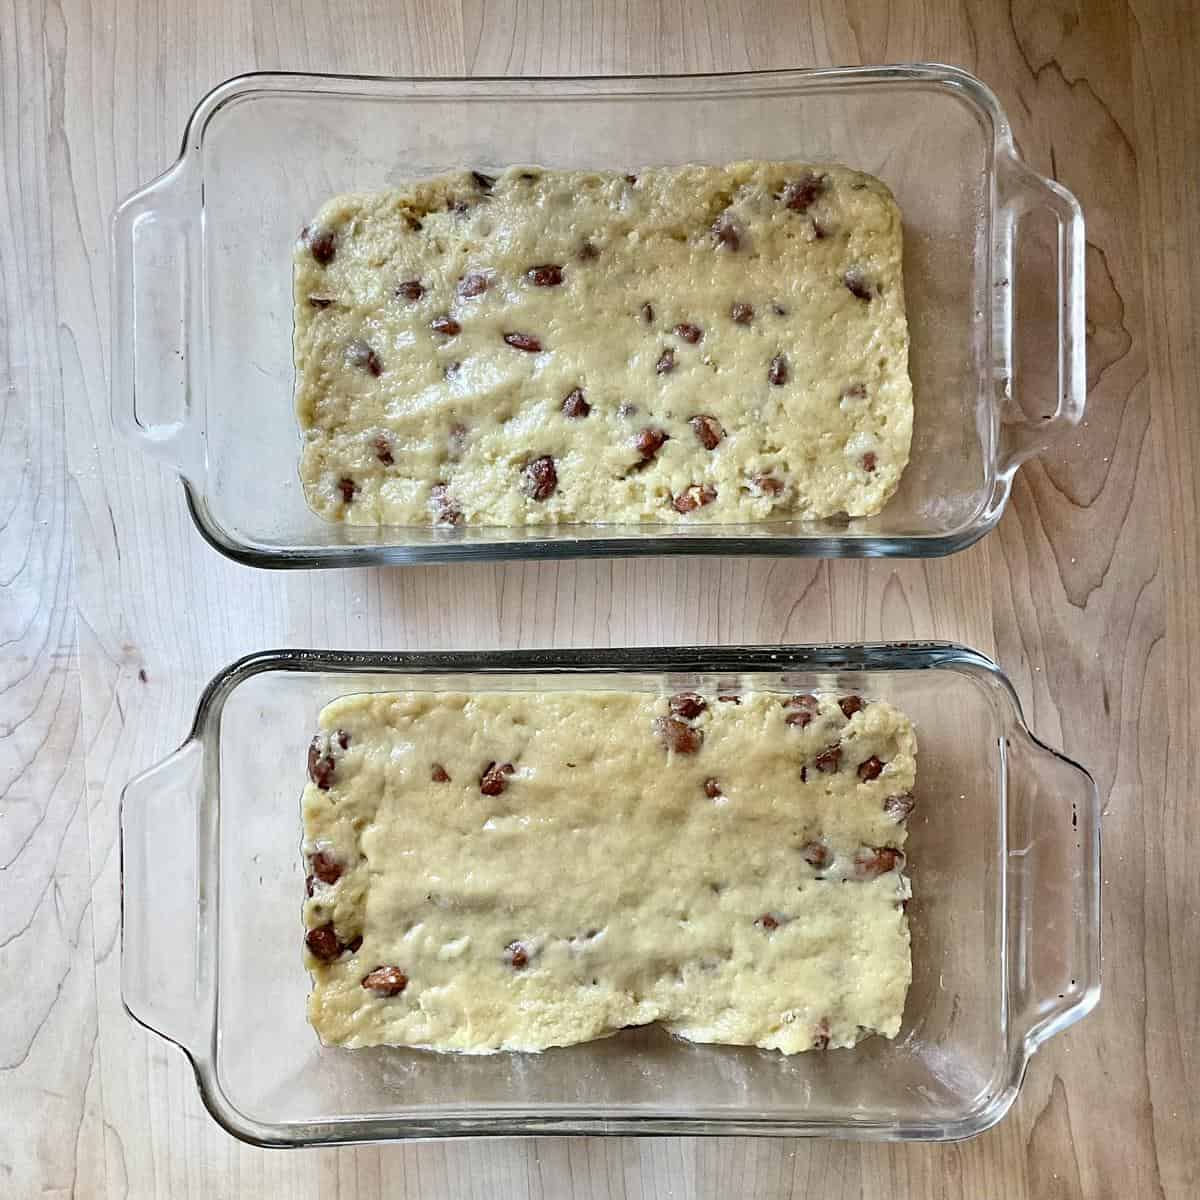 Almond bread dough in two loaf pans.